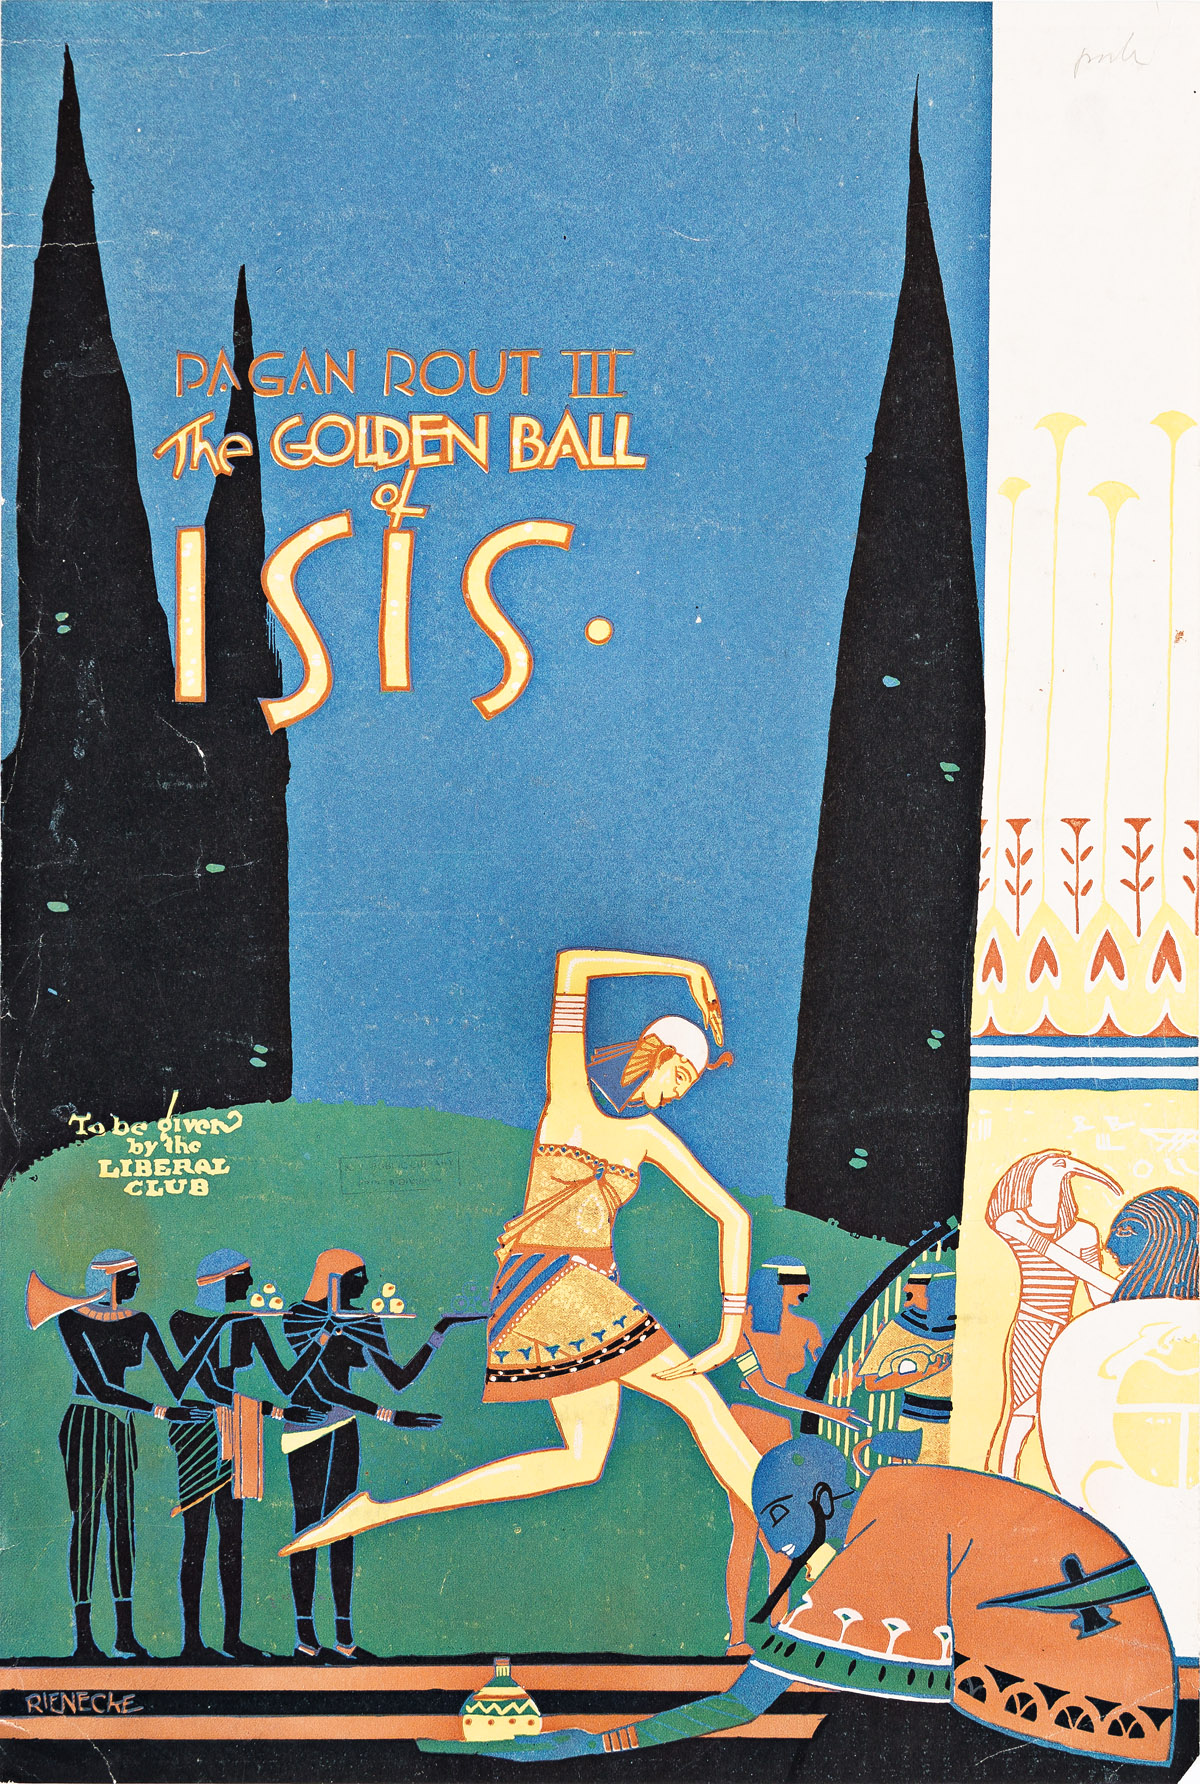 RIENECKE (DATES UNKNOWN) Pagan Rout III the Golden Ball of Isis.